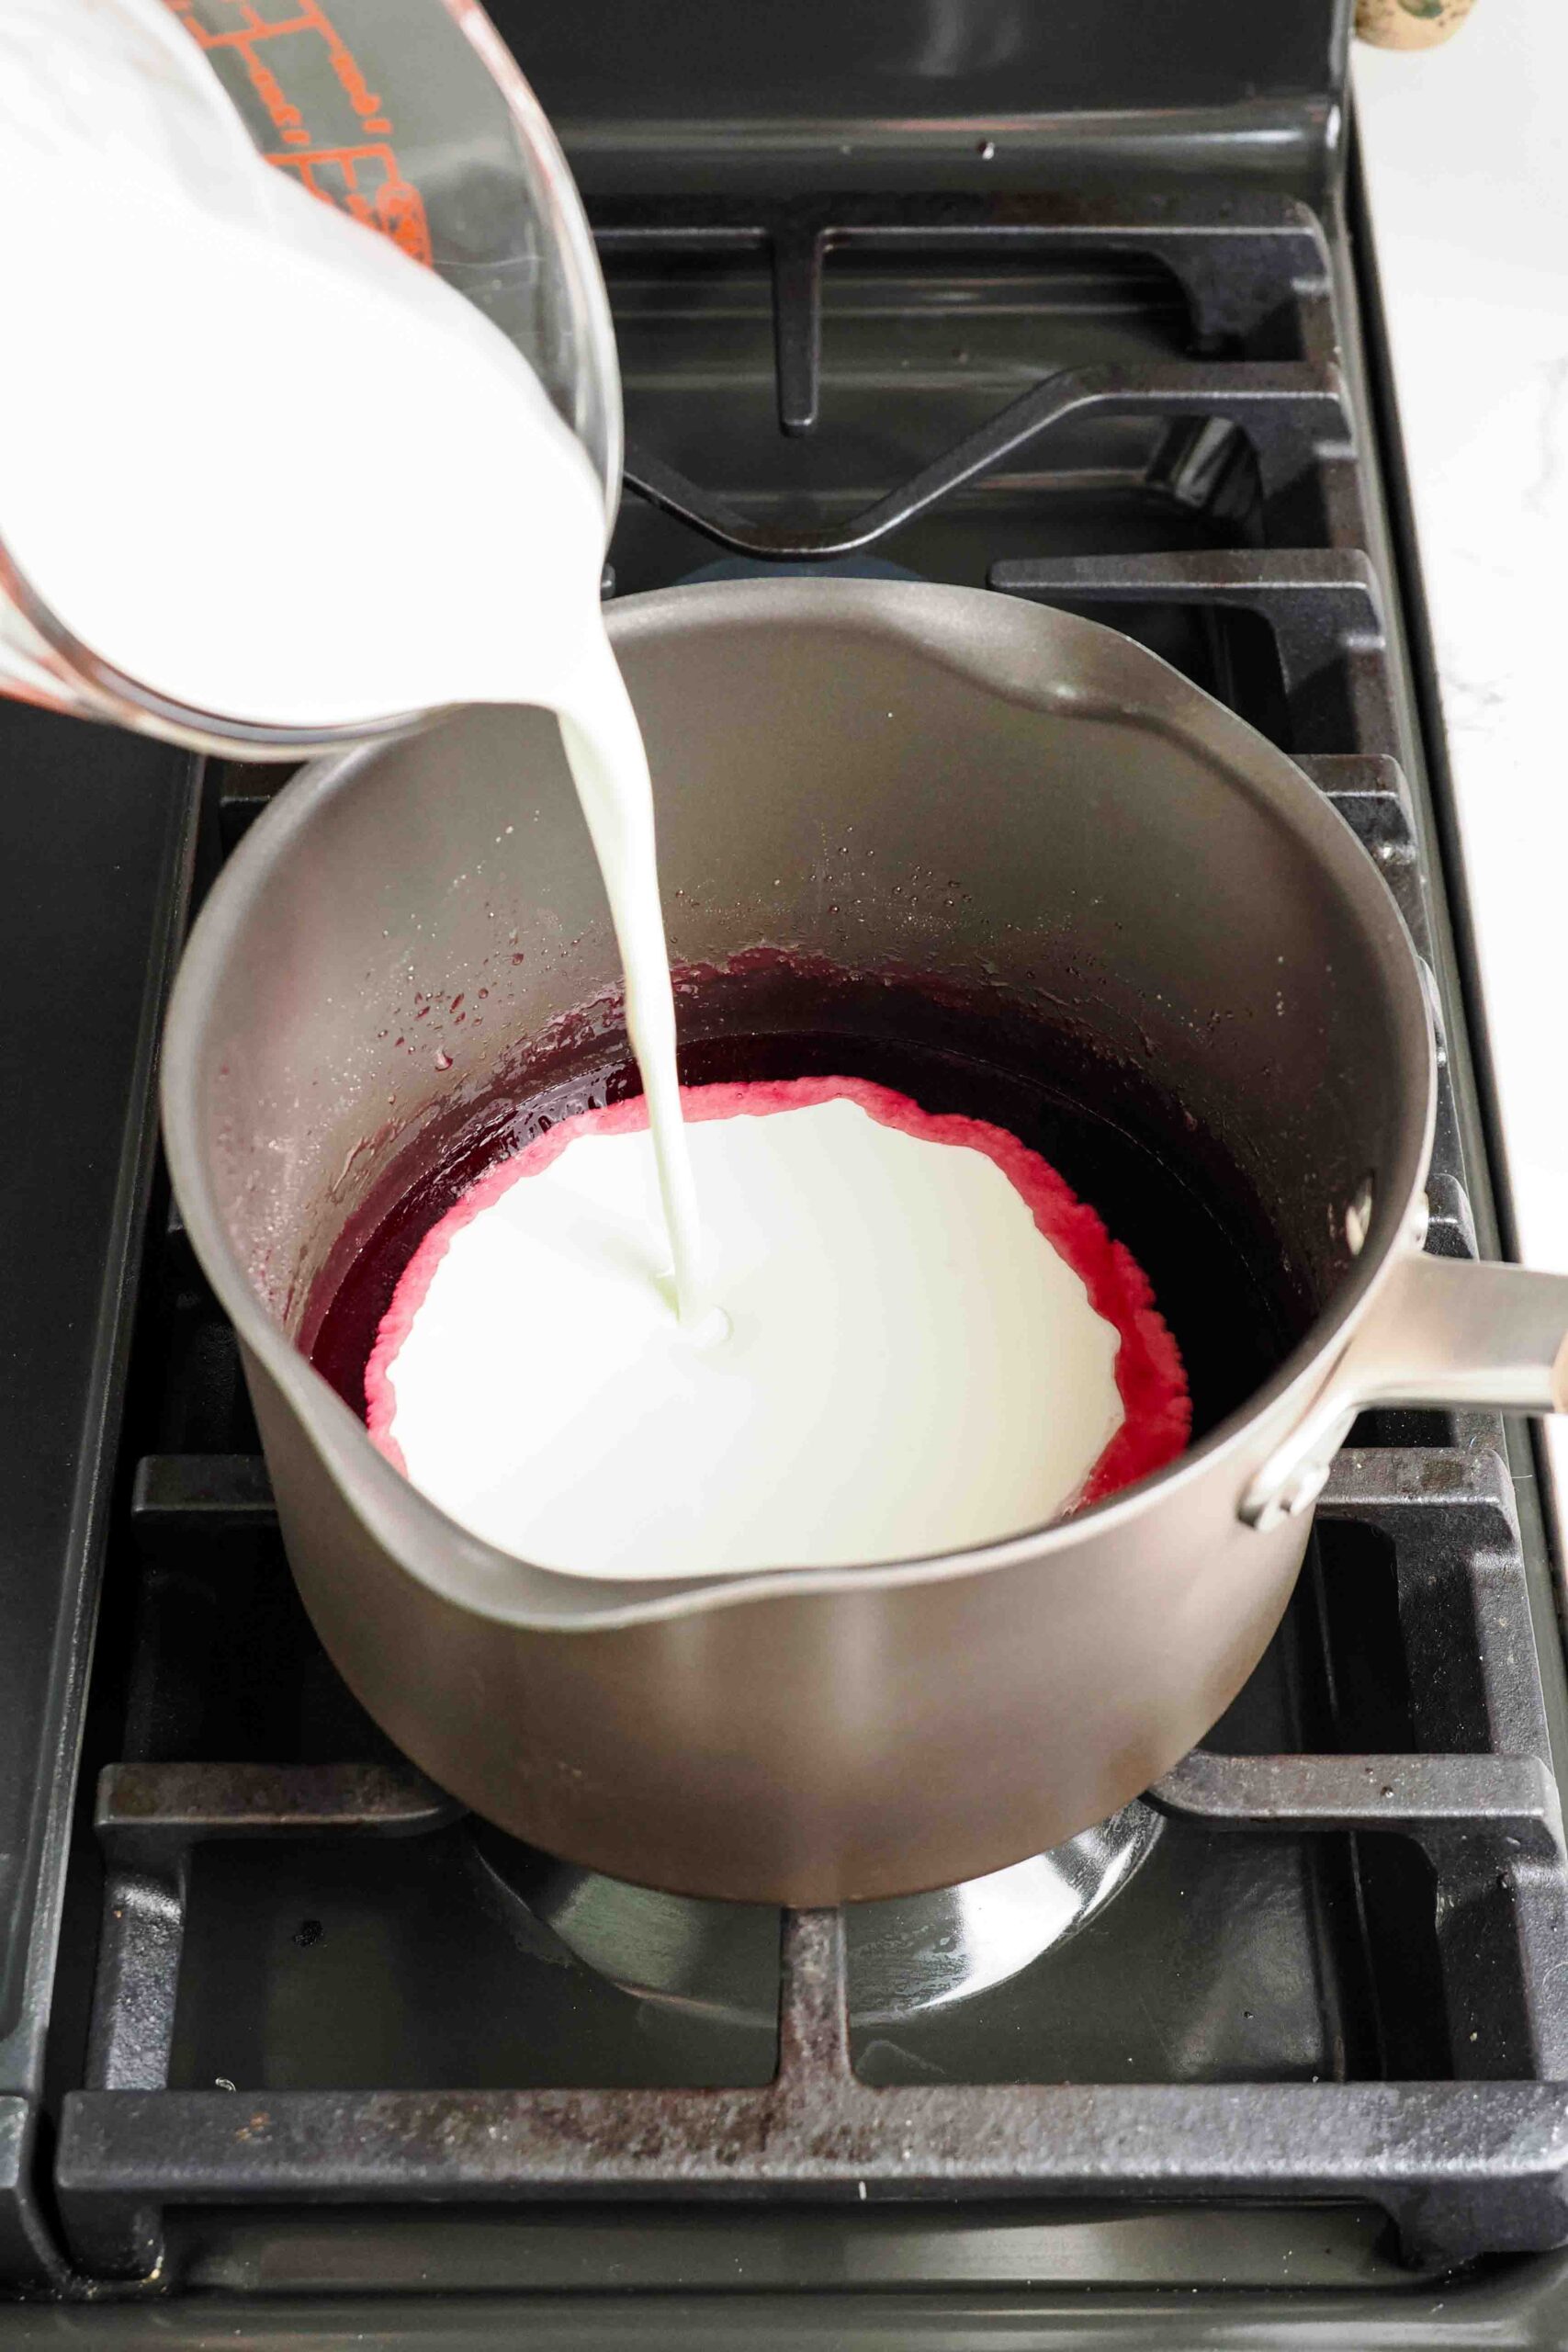 A measuring cup pours heavy cream into cooled cherry syrup on the stove.